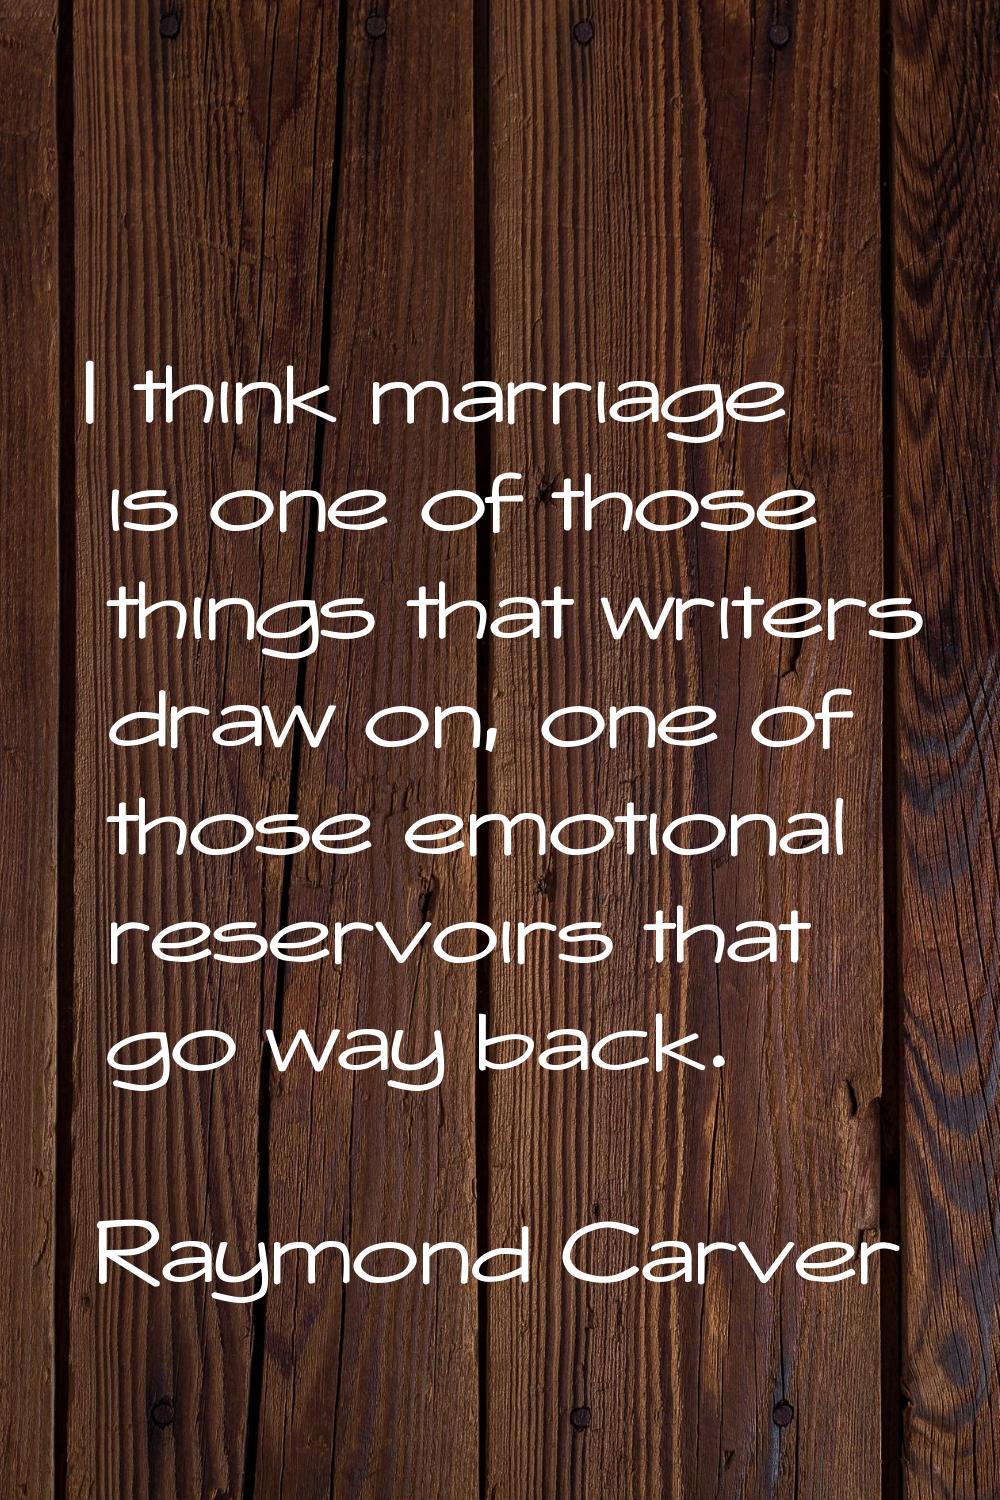 I think marriage is one of those things that writers draw on, one of those emotional reservoirs tha